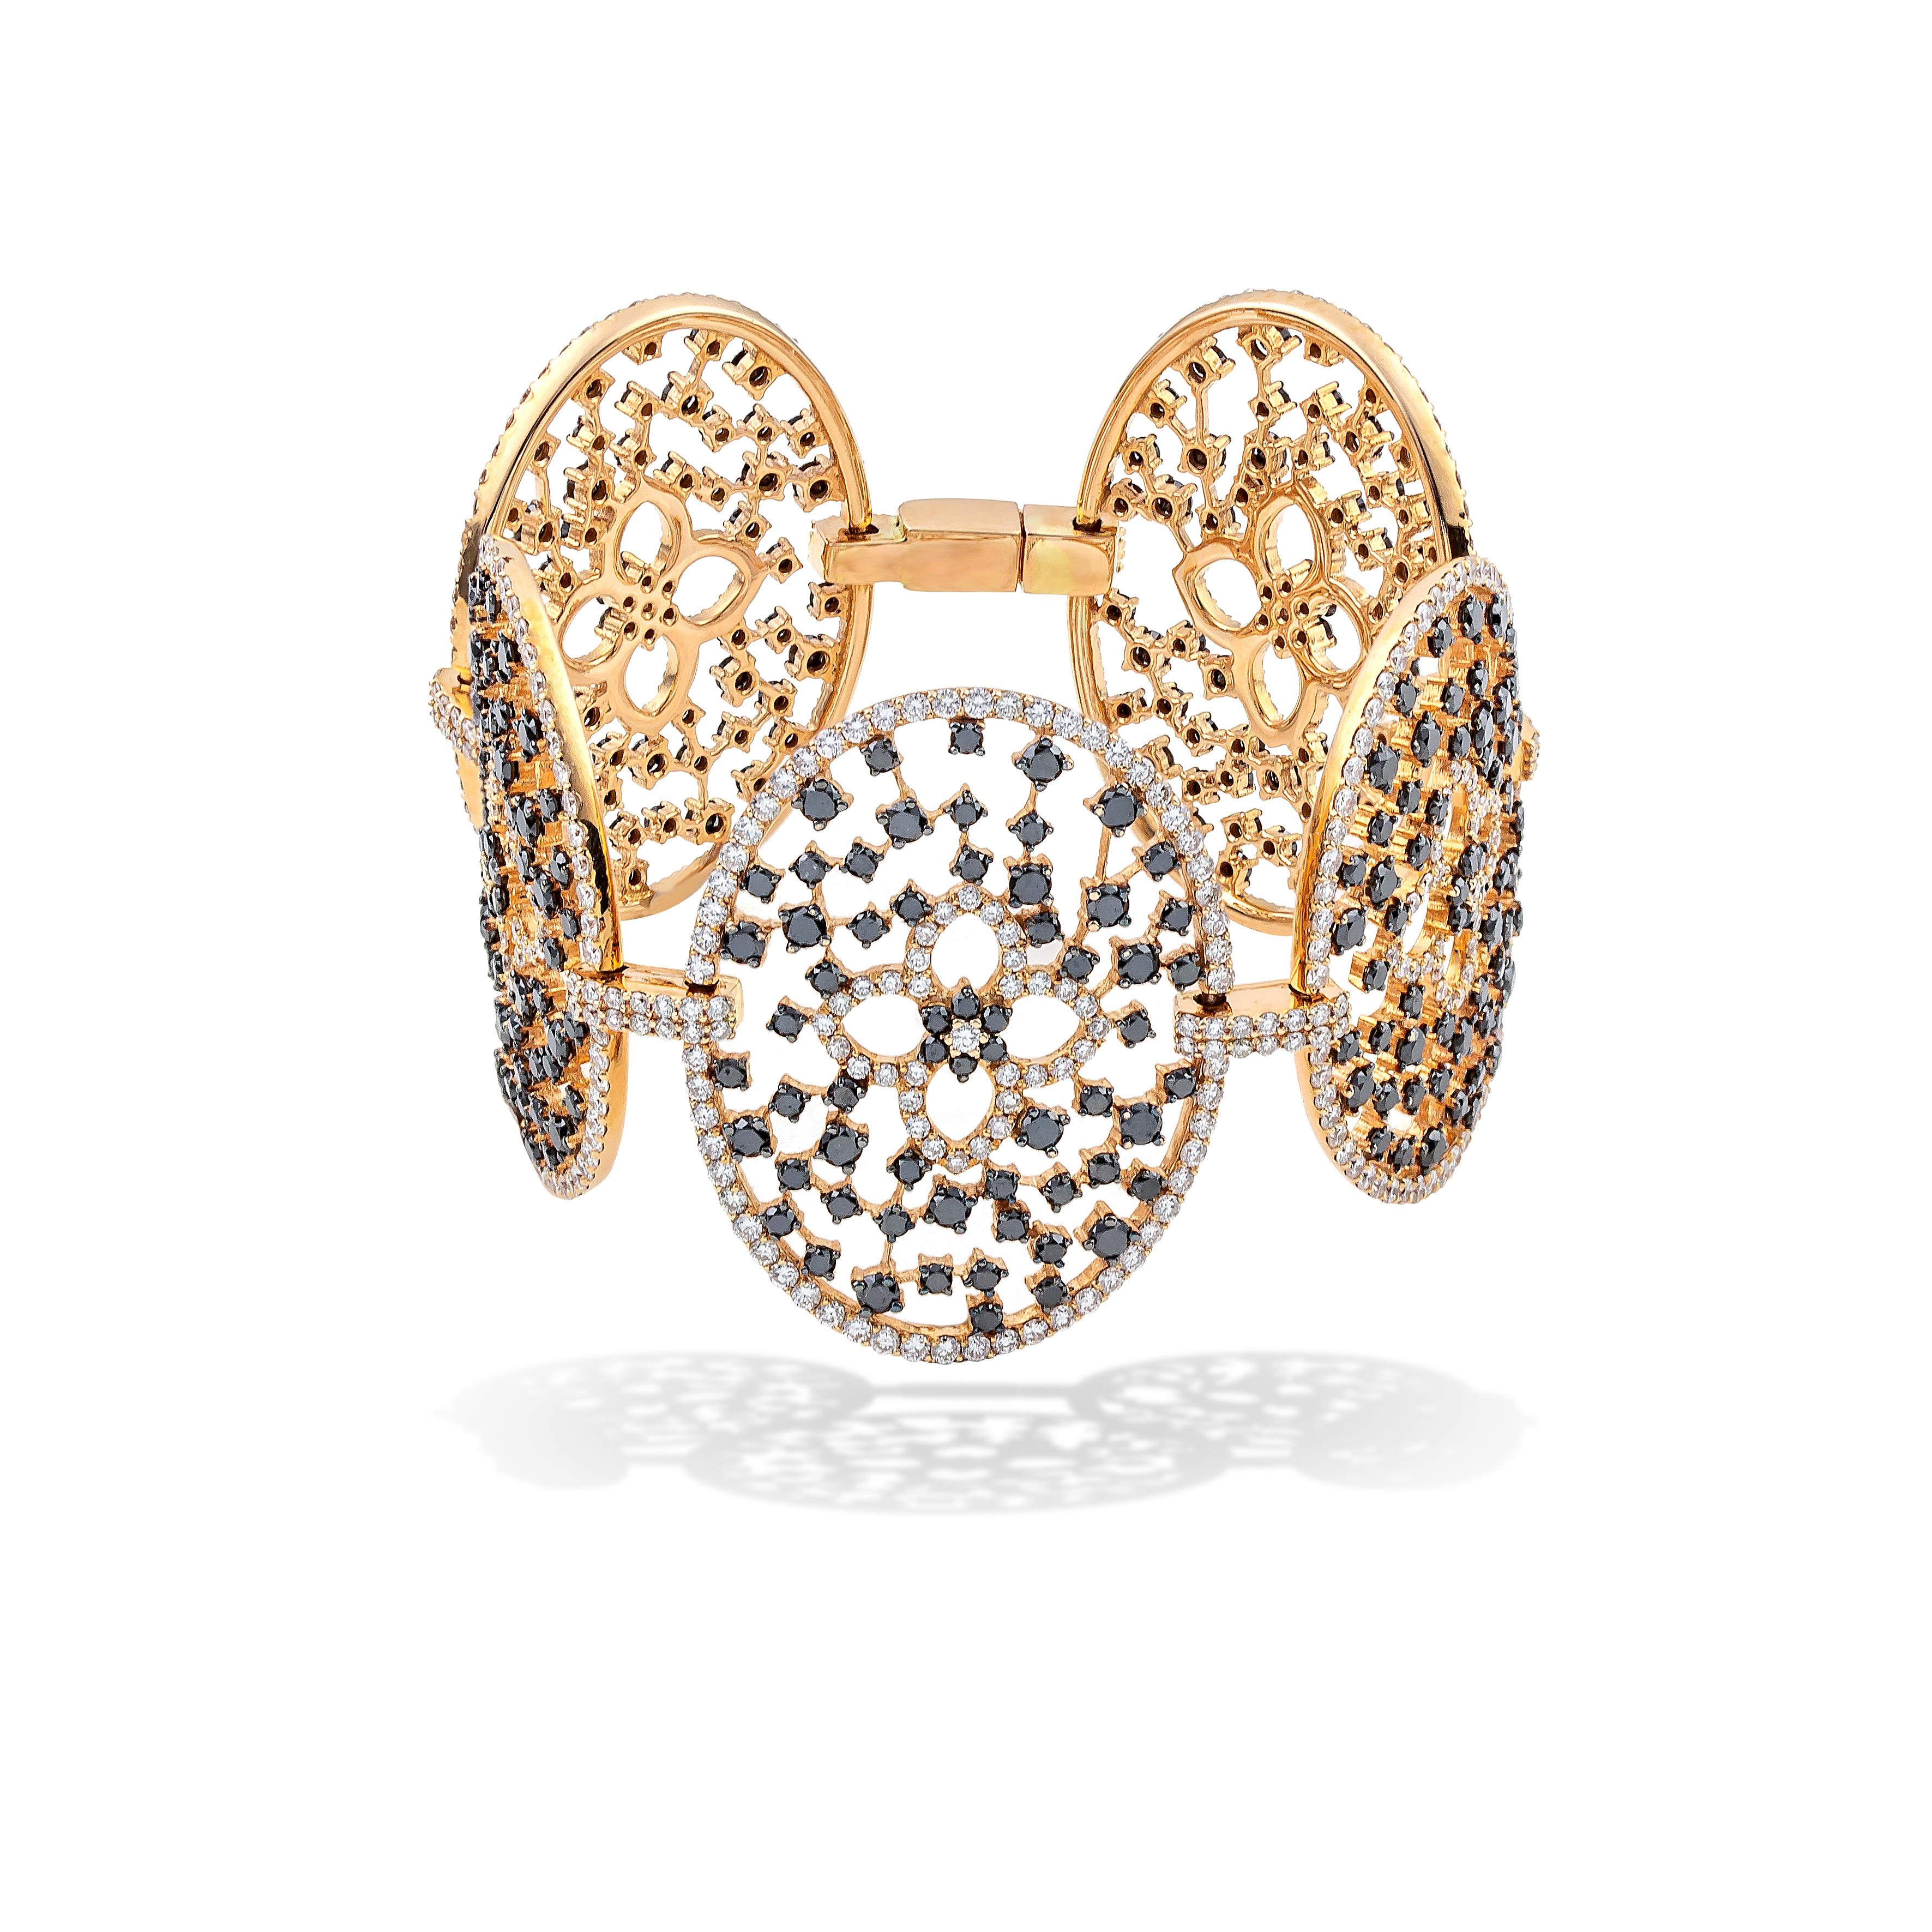 Contemporary Diamond Cuff Flower Bracelet in 18Kt Yellow Gold with Prong and Pave Setting For Sale